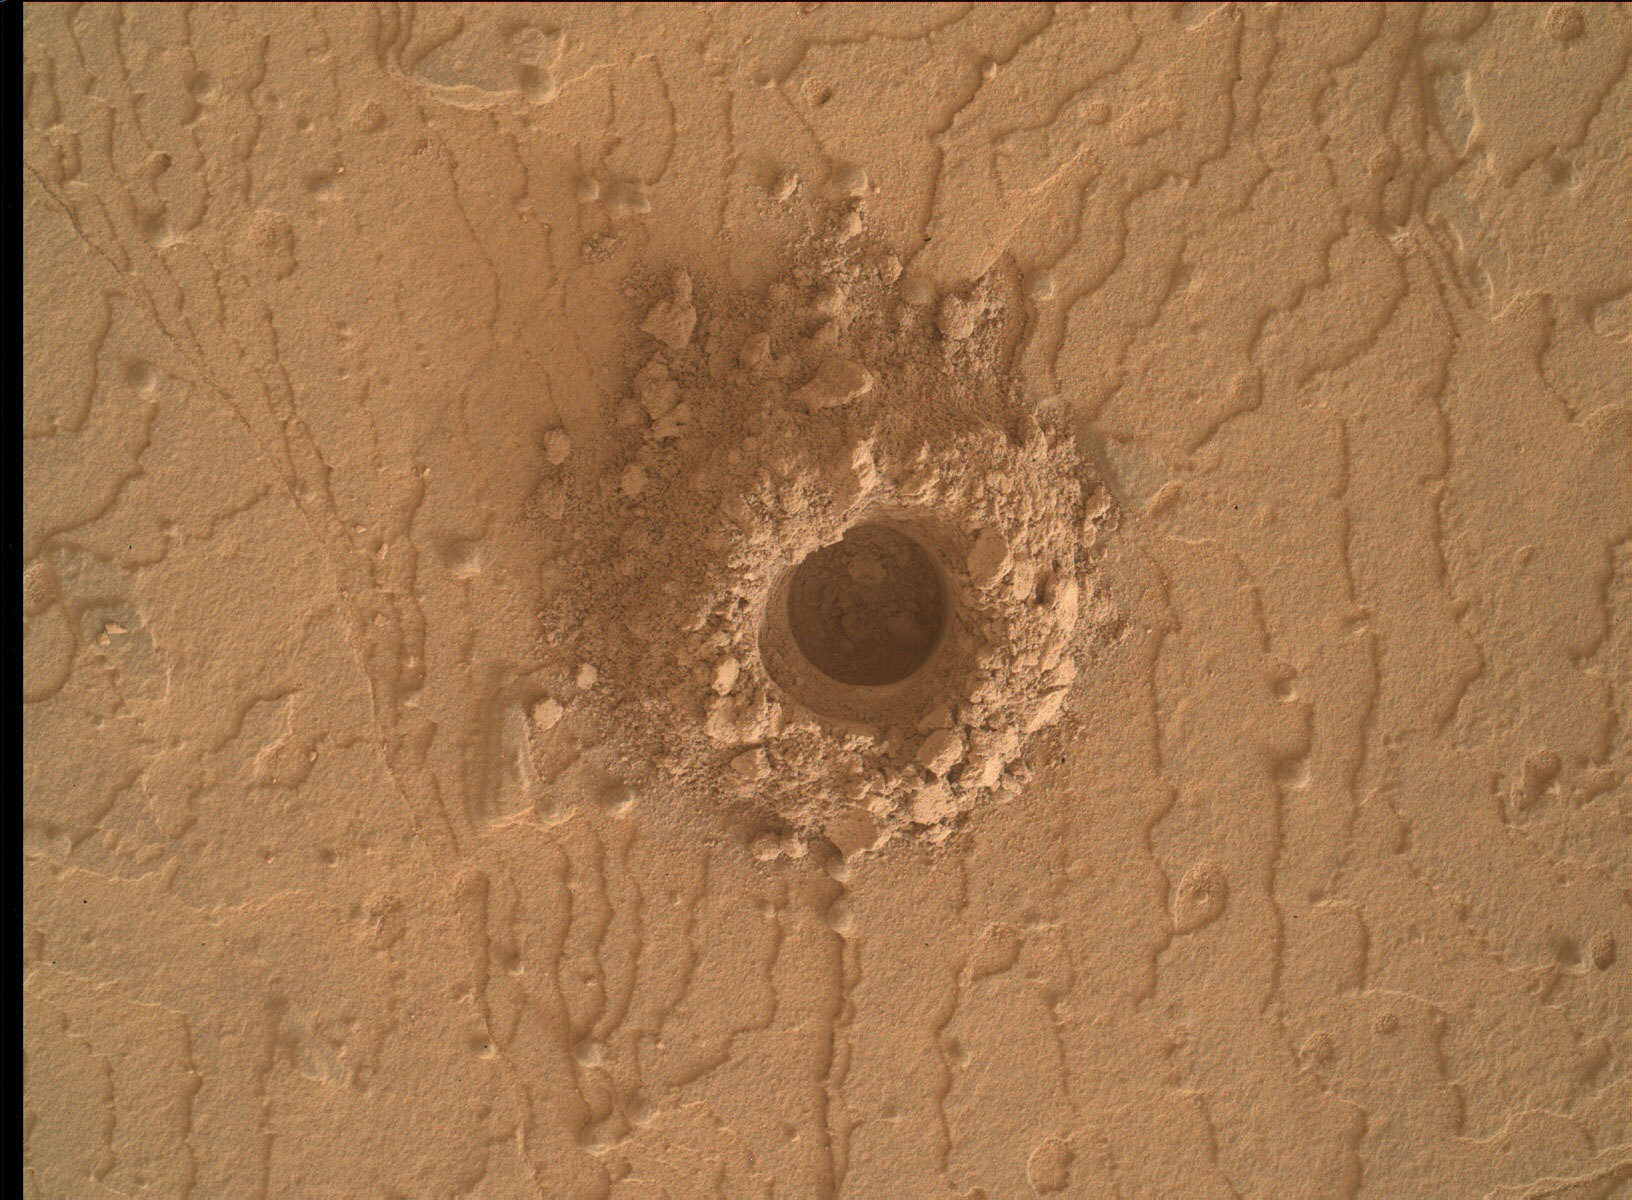 NASA's Mars rover Curiosity acquired this image using its Mars Hand Lens Imager (MAHLI), located on the turret at the end of the rover's robotic arm on Sol 3624.